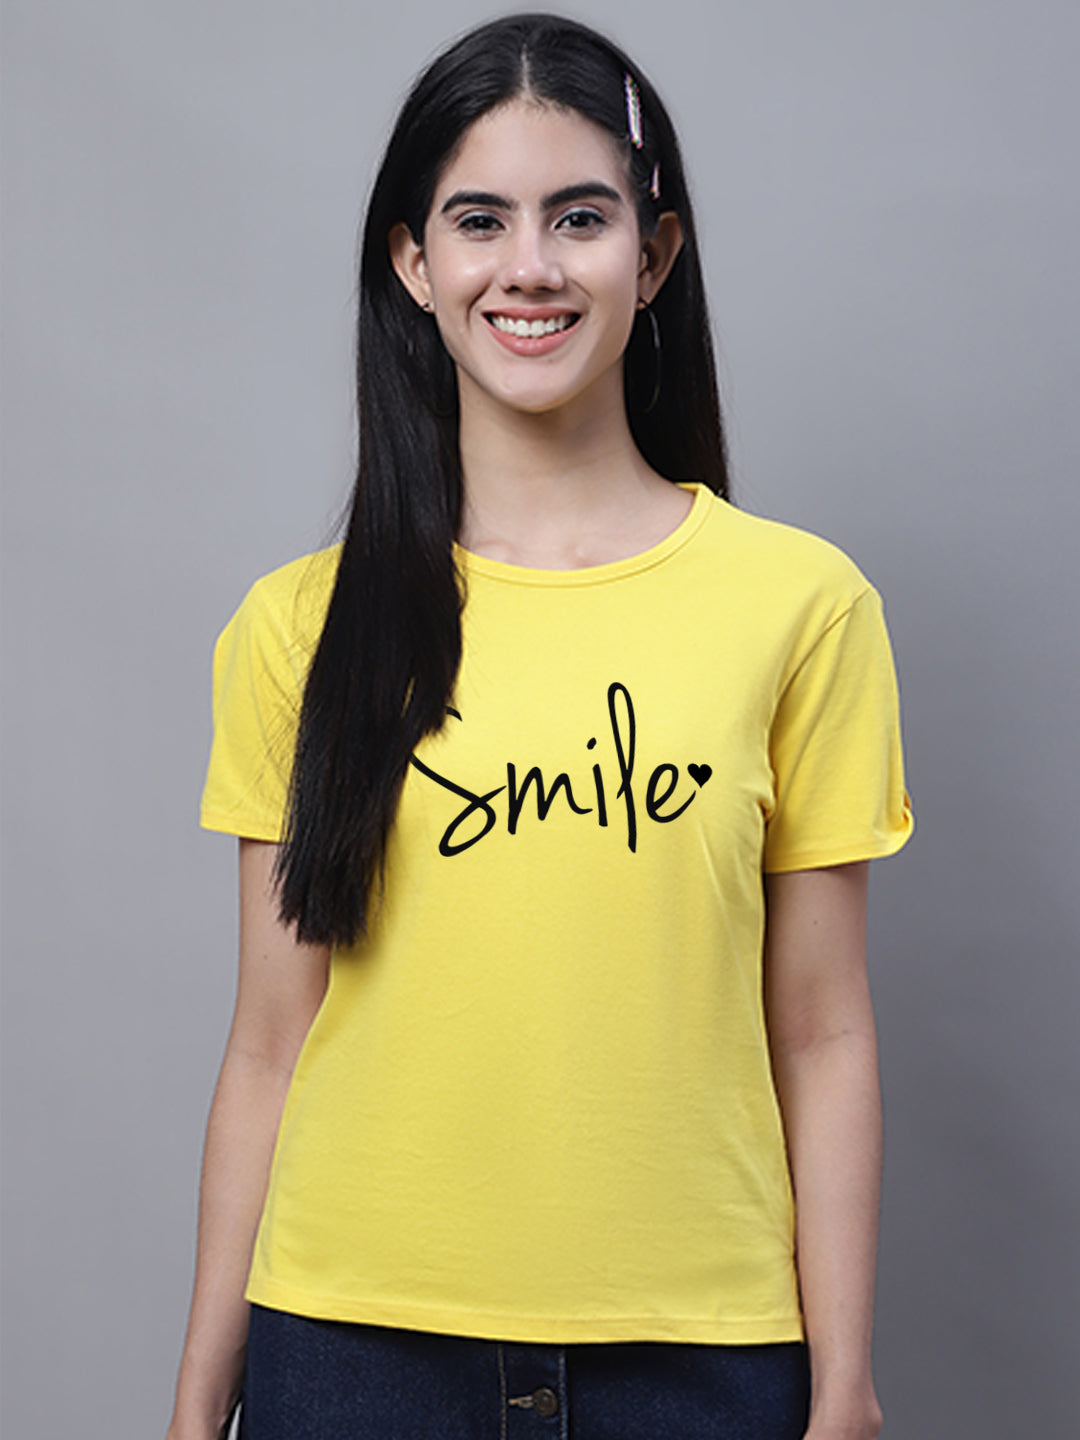 Fbar Women's Smile Printed Cotton T-Shirt with Slit Sleeves - Friskers